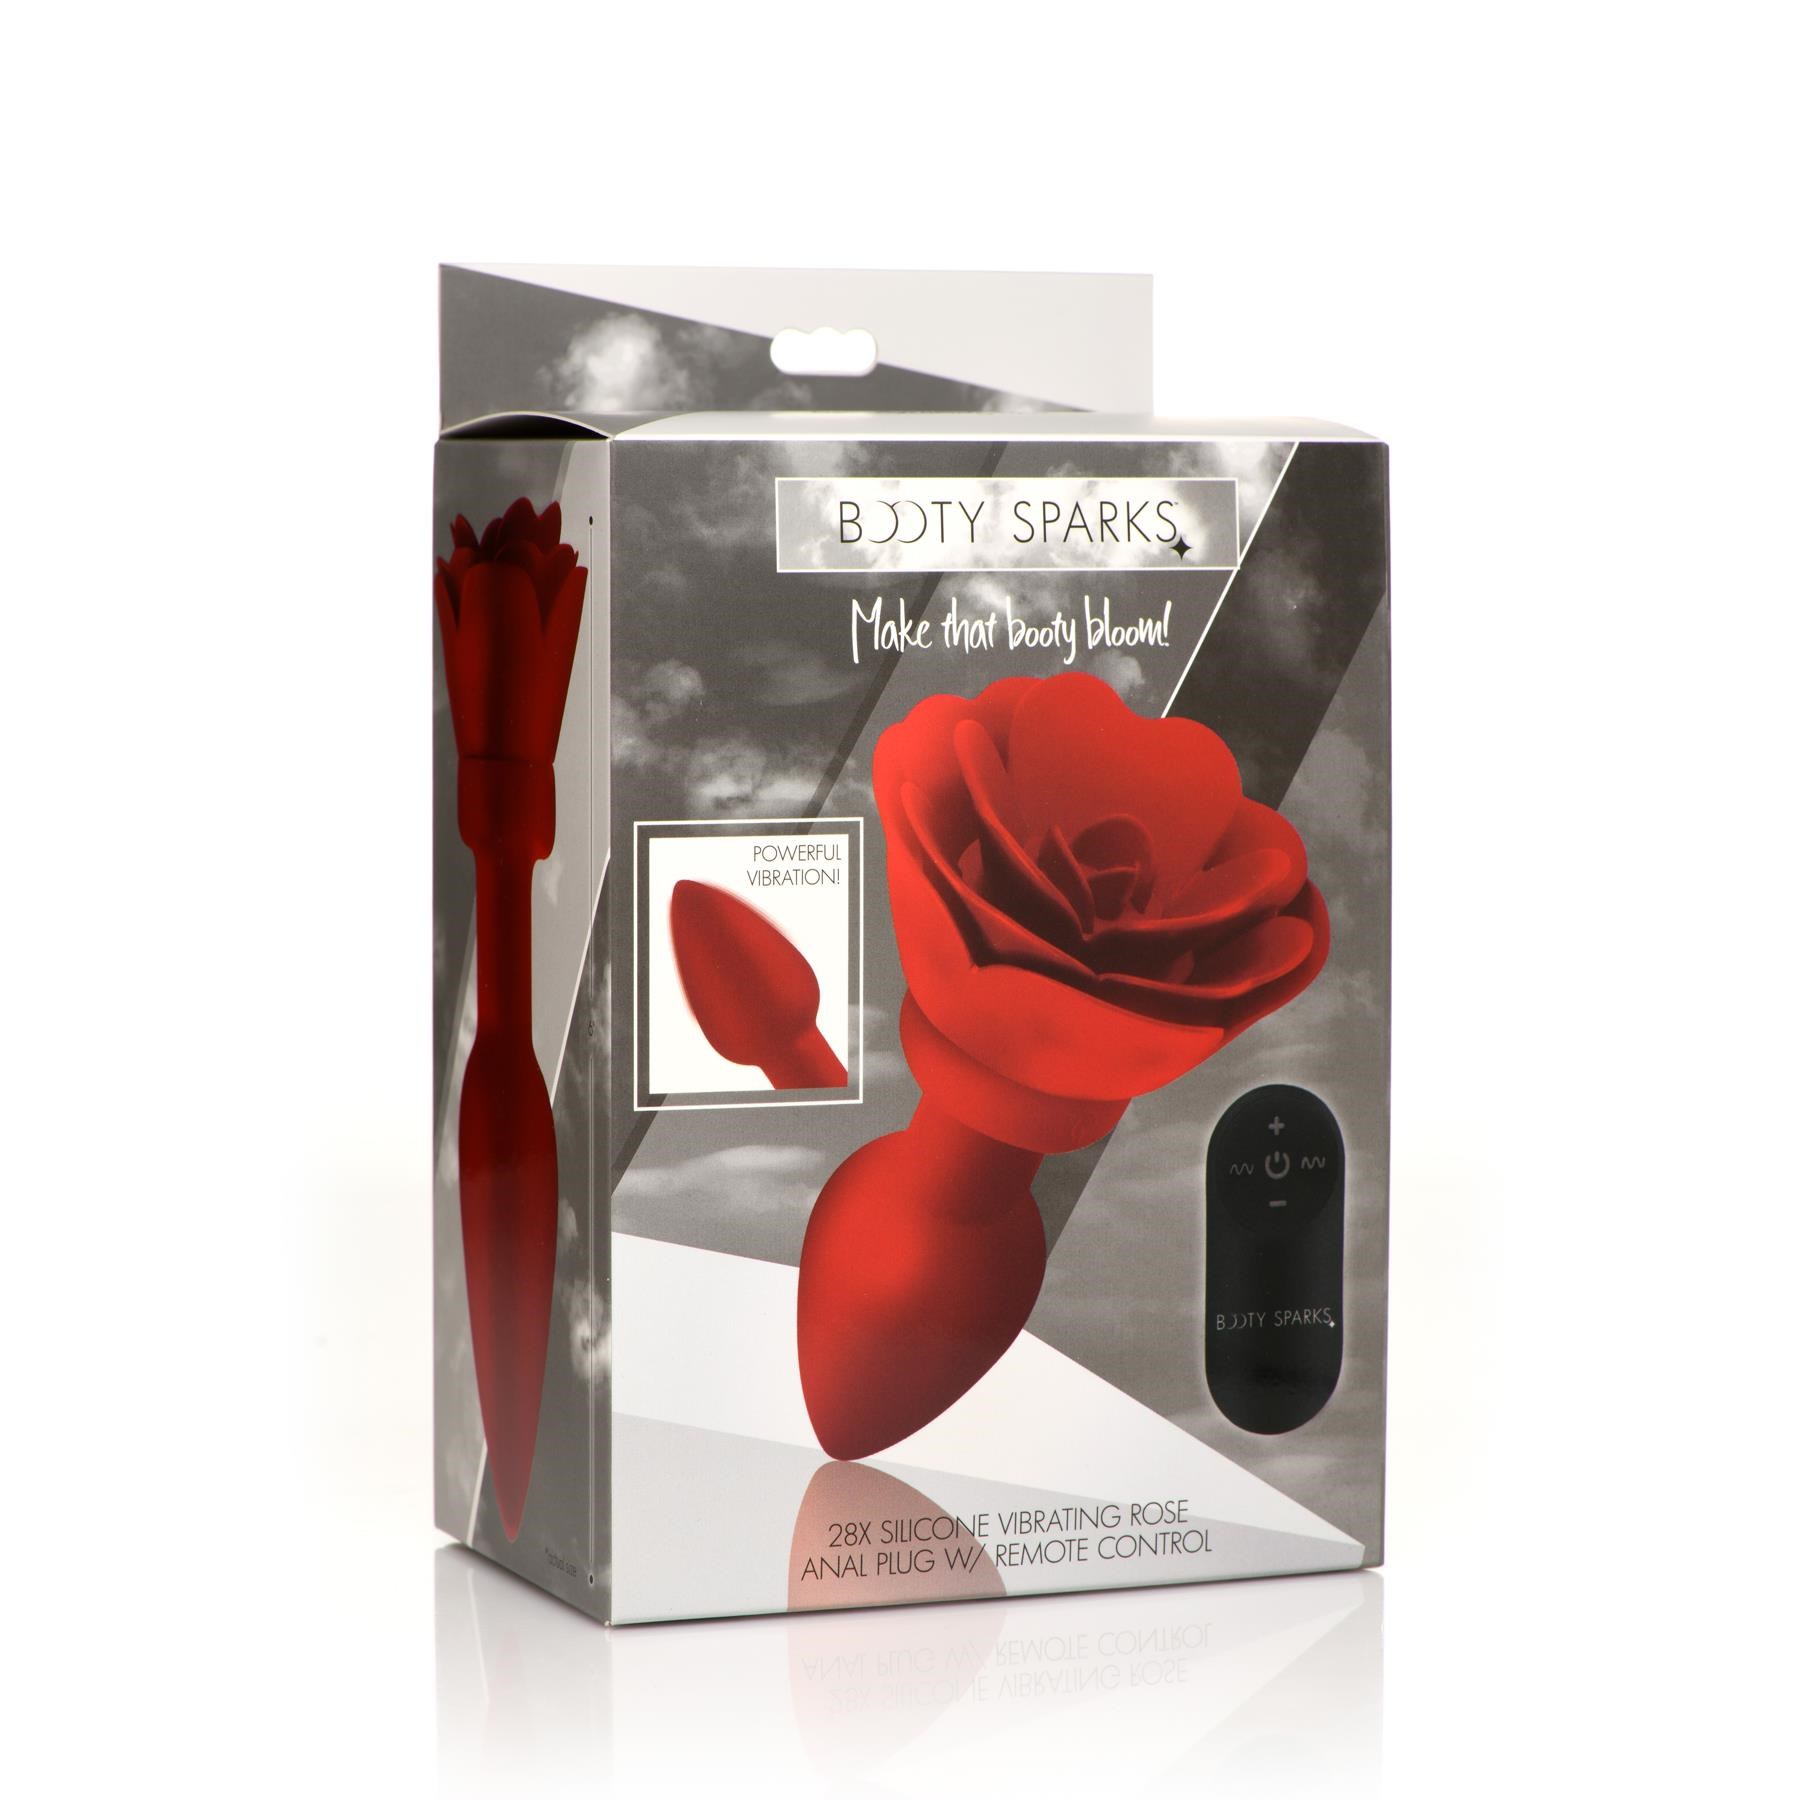 Booty Sparks Vibrating Rose Anal Plug with Remote Control - Packaging